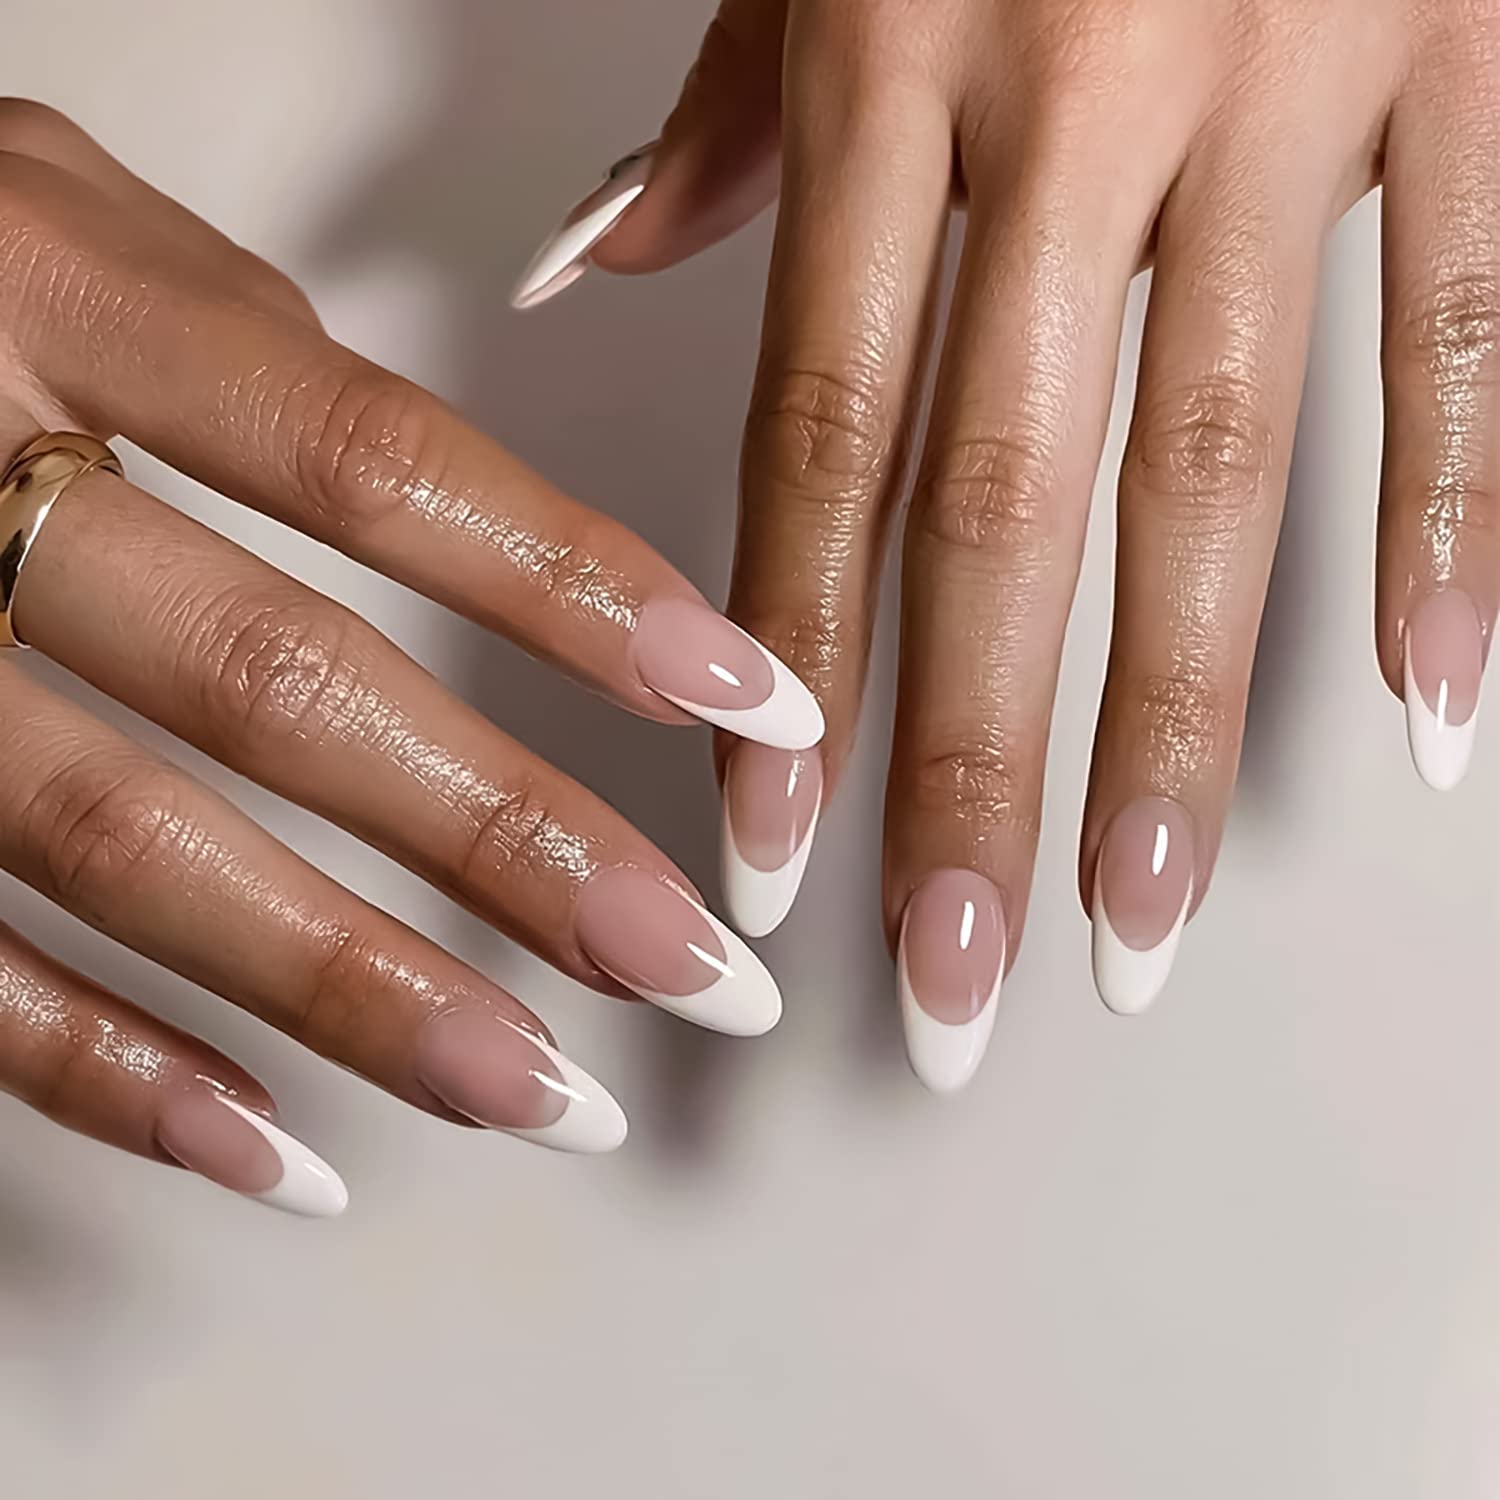 The Chocolate Milk French Manicure Is Putting A Funky Twist On The Neutral  Nails Trend